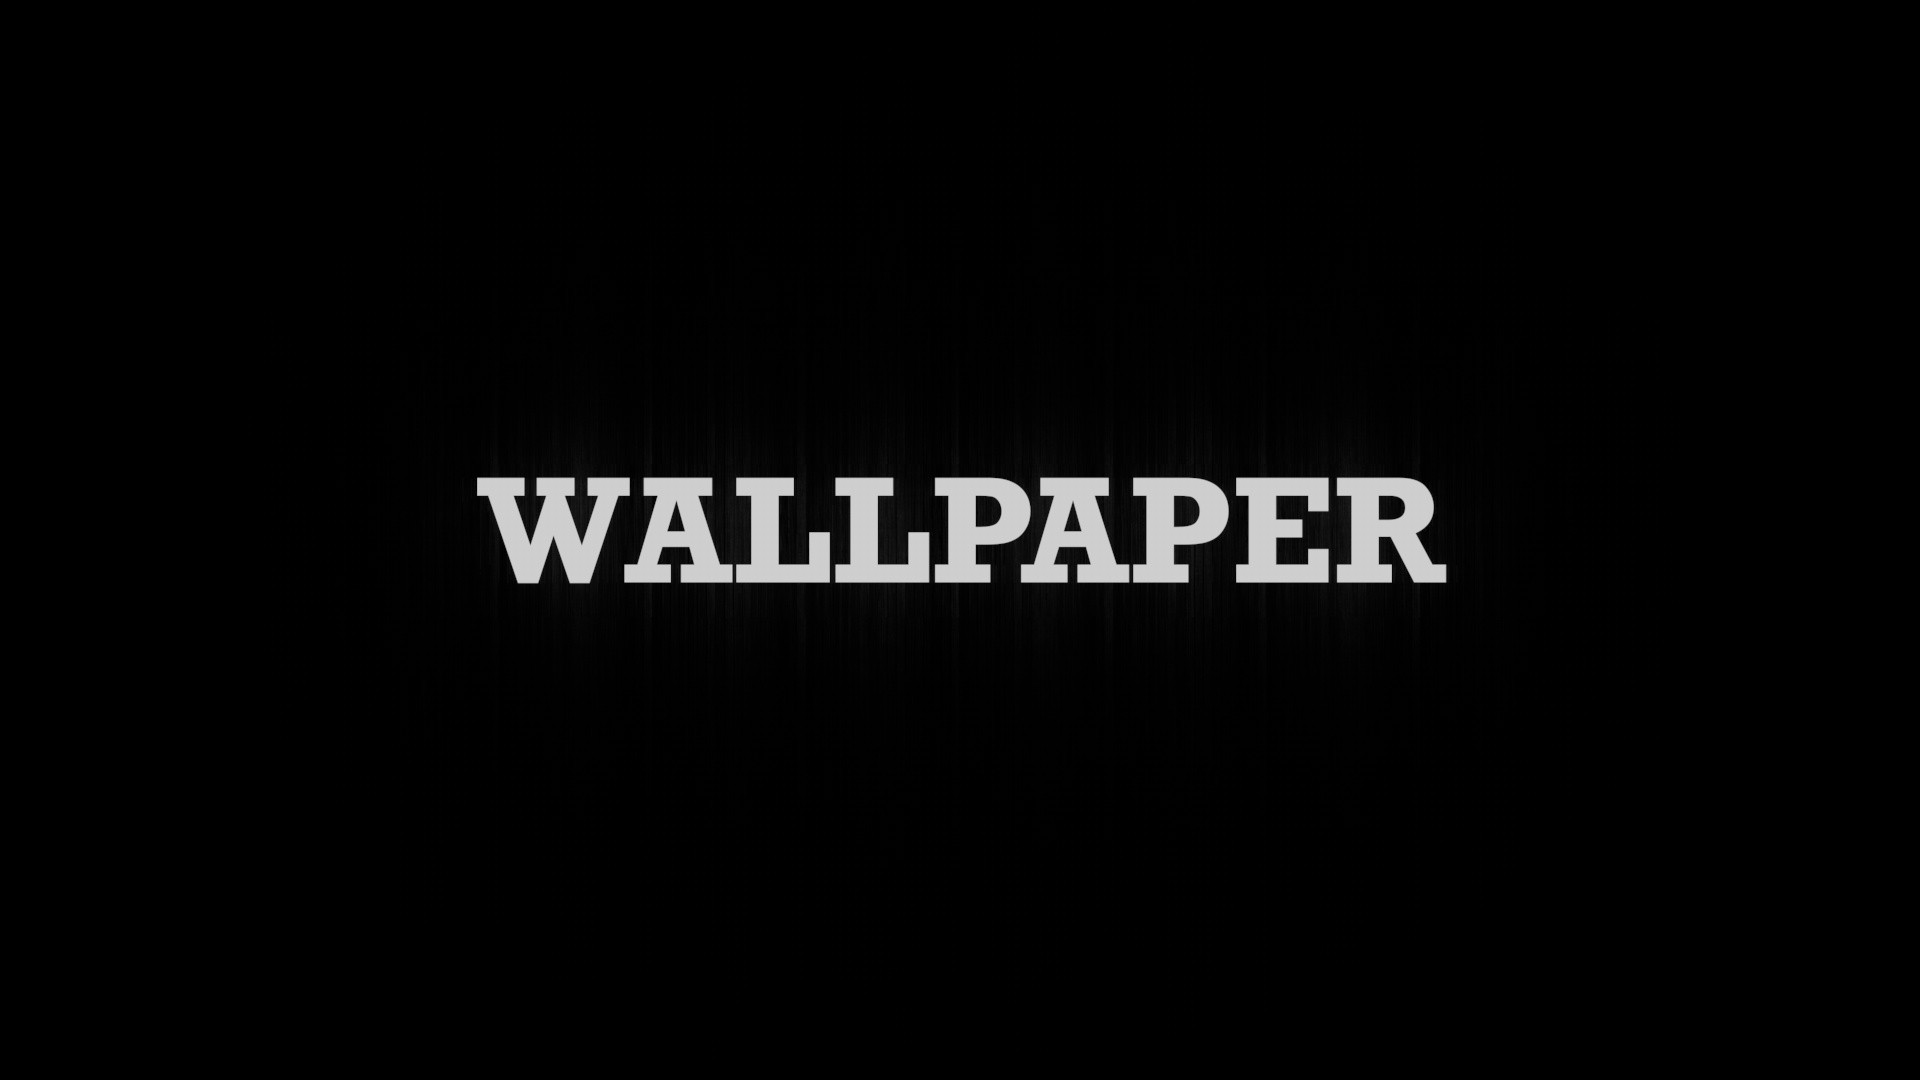 paper, Black, White, Wood, Text, Black, Background Wallpapers HD / Desktop and Mobile Backgrounds